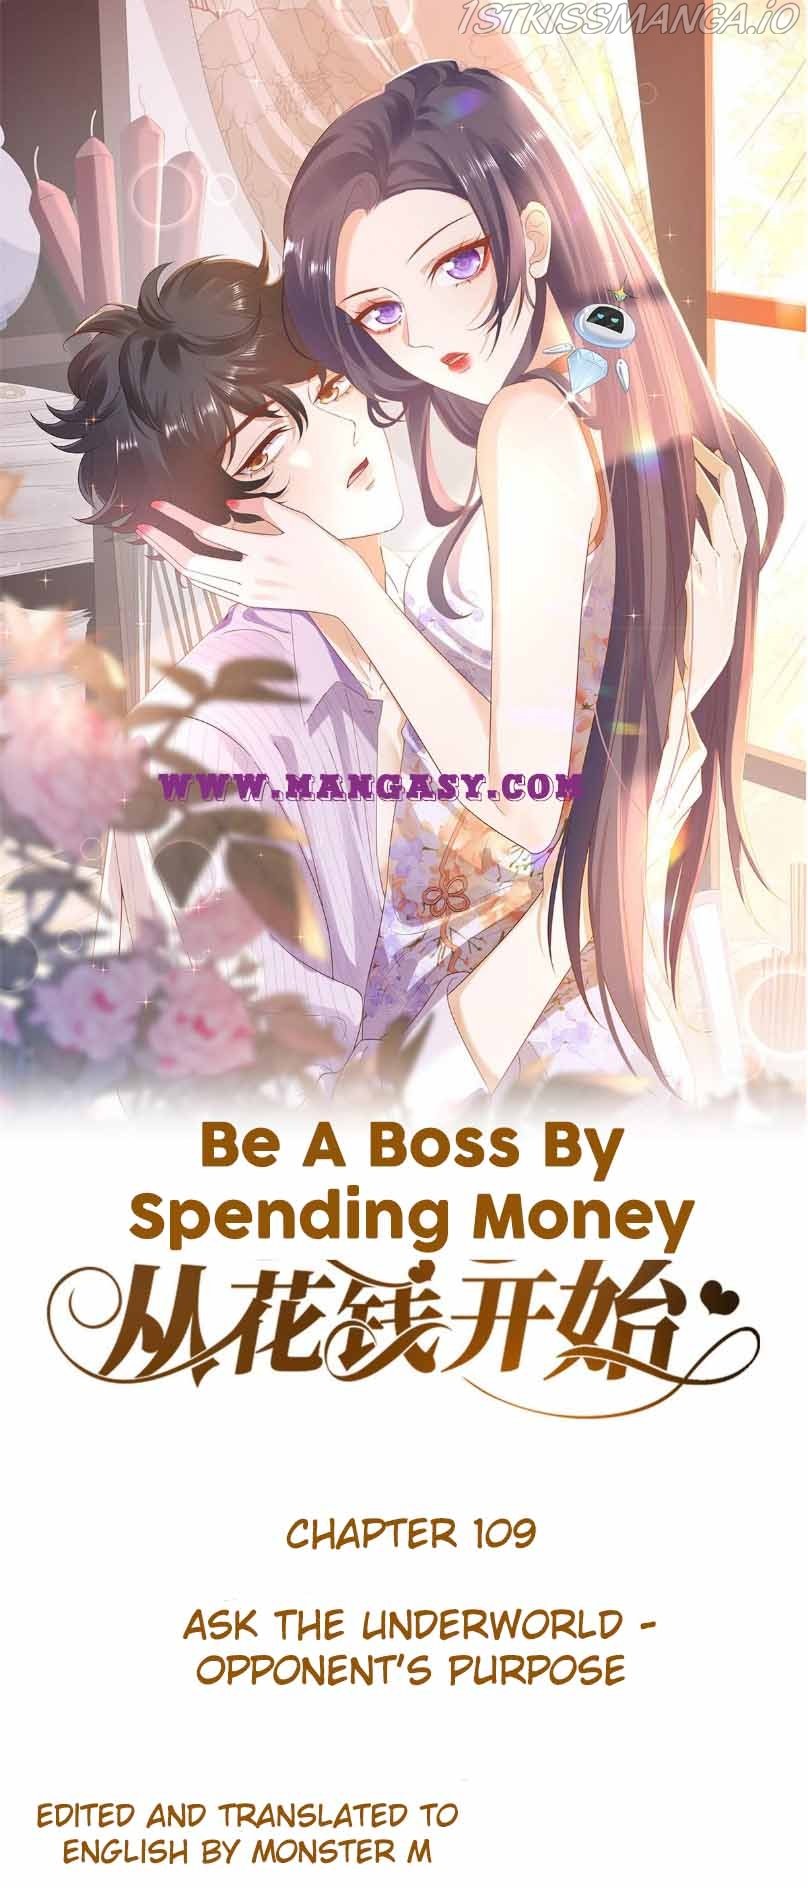 Becoming a Big Boss Starts with Spending Money chapter 109